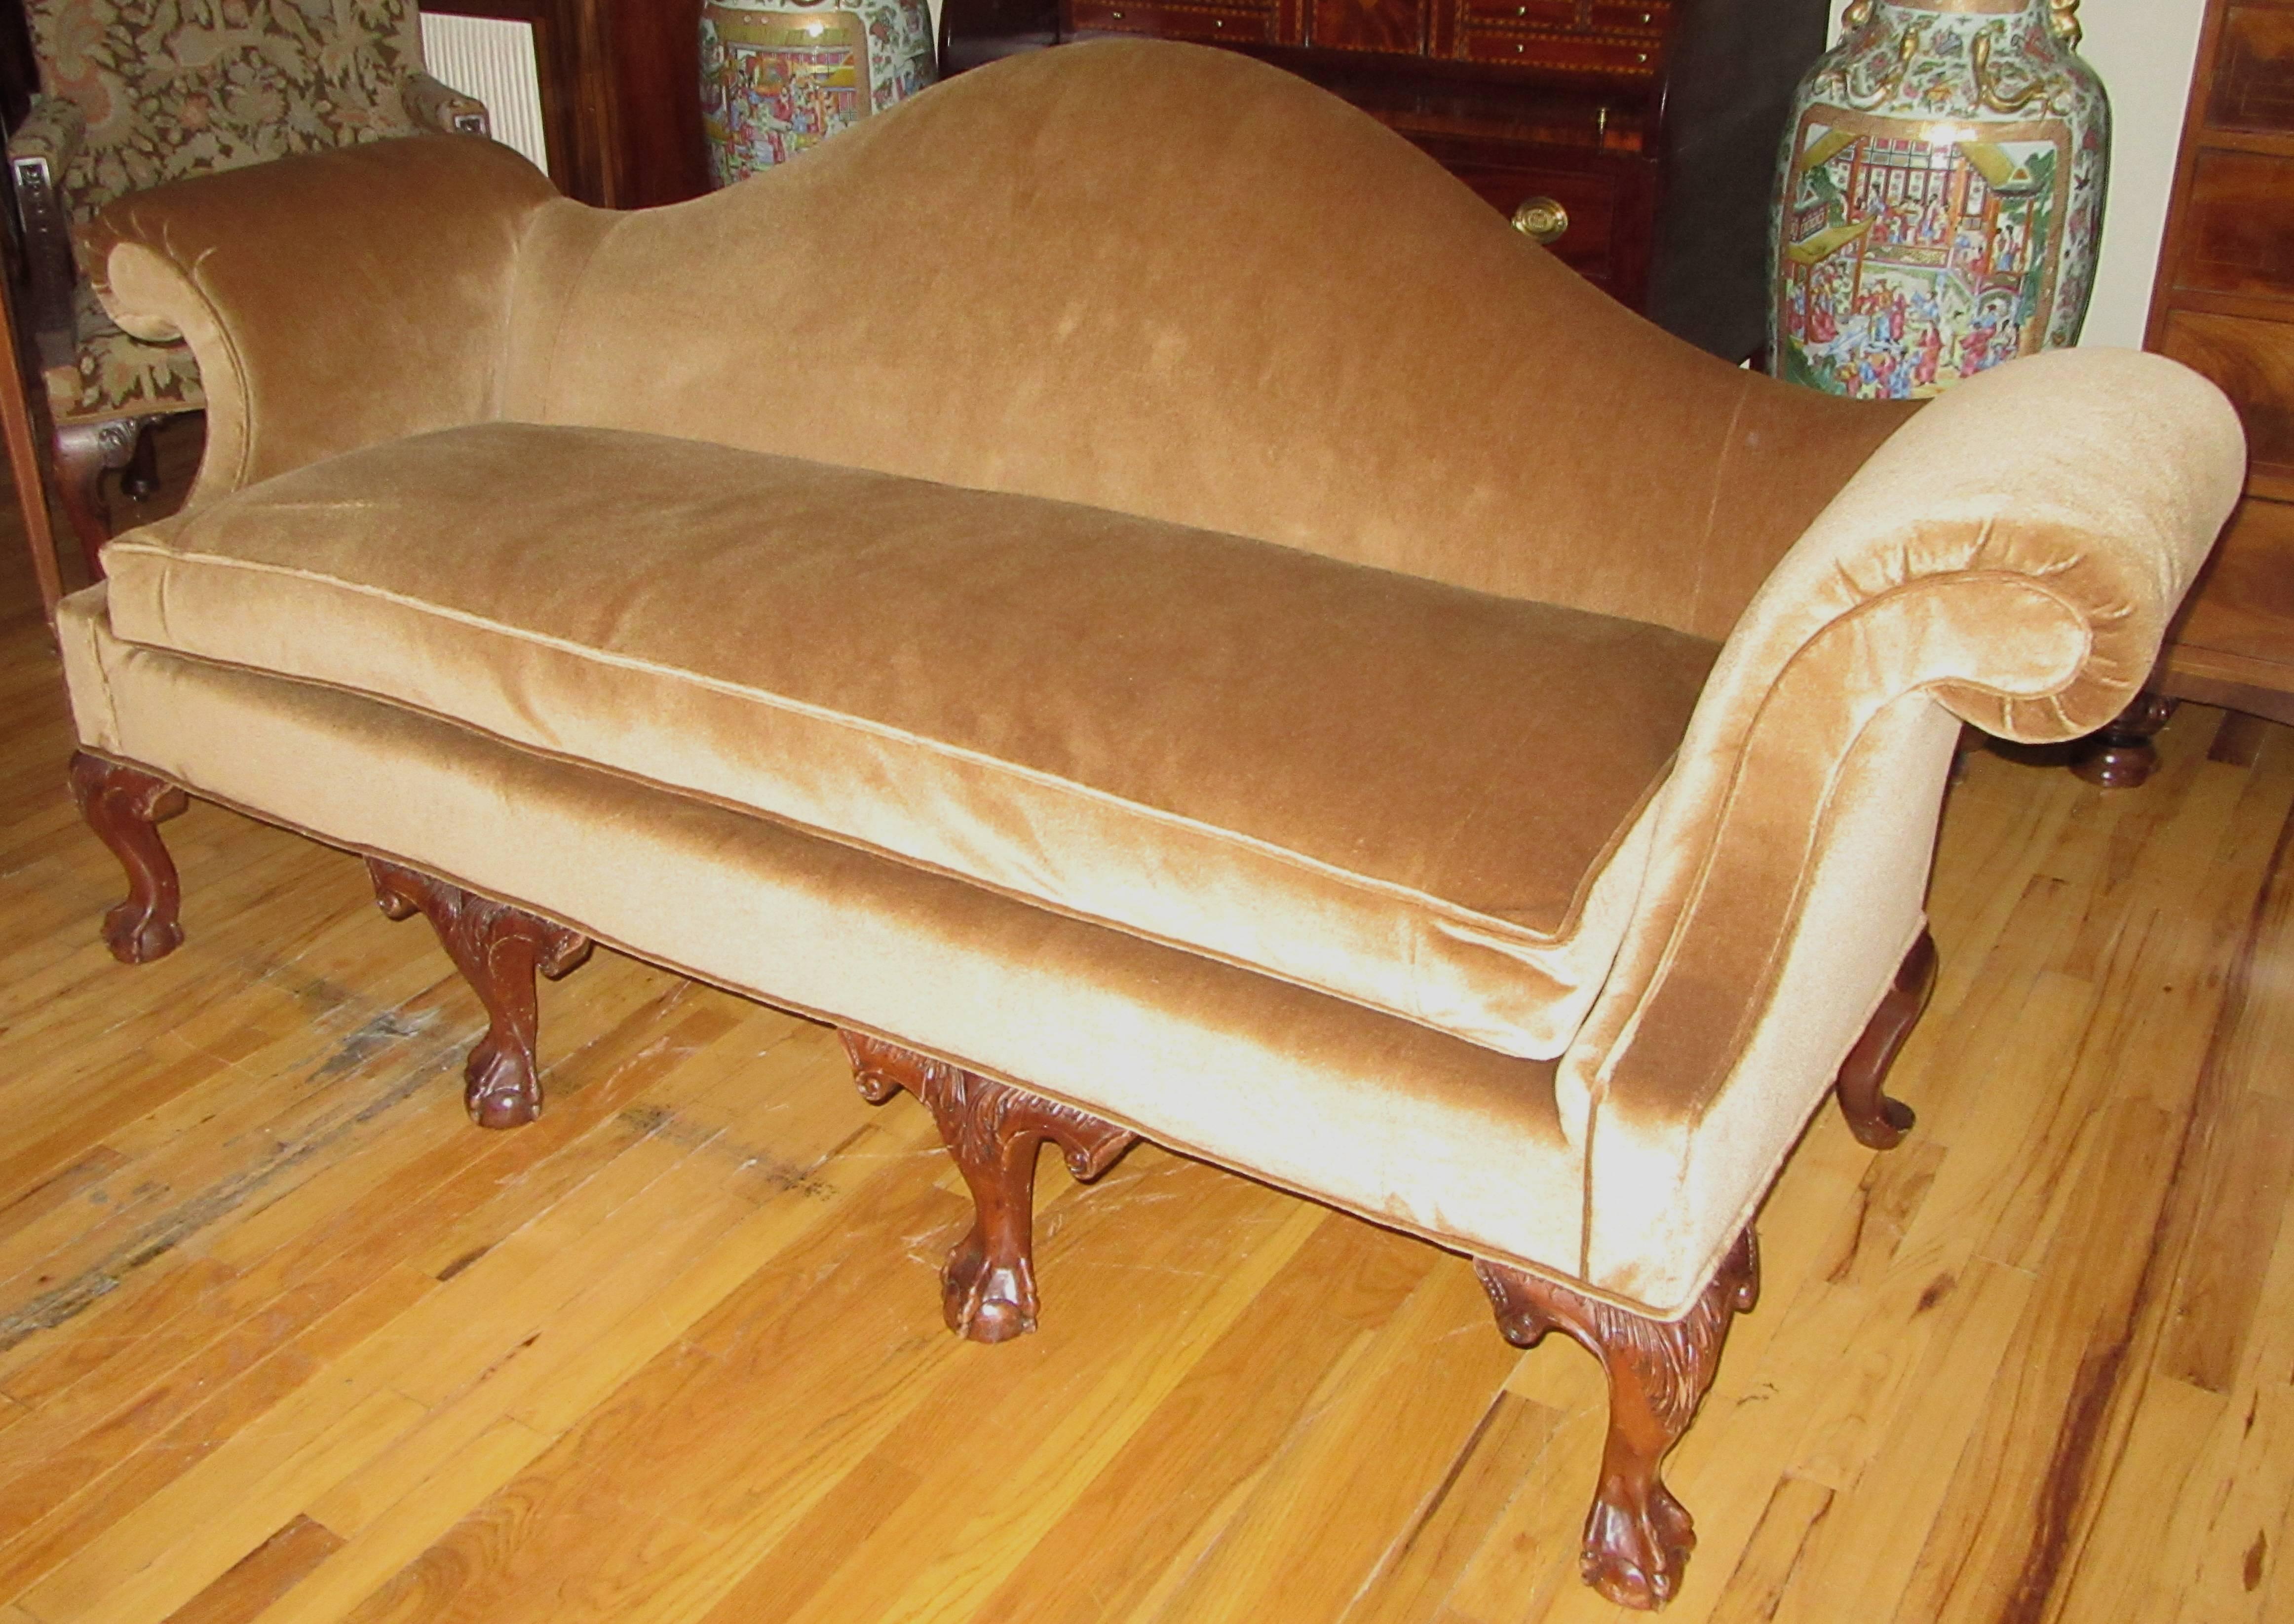 A long camelback sofa on eight cabriole mahogany legs. The front are hand-carved acanthus leaf and scroll design terminating in claw and ball feet. Newly upholstered in a golden velvet silk mohair with a single down filled cushion.